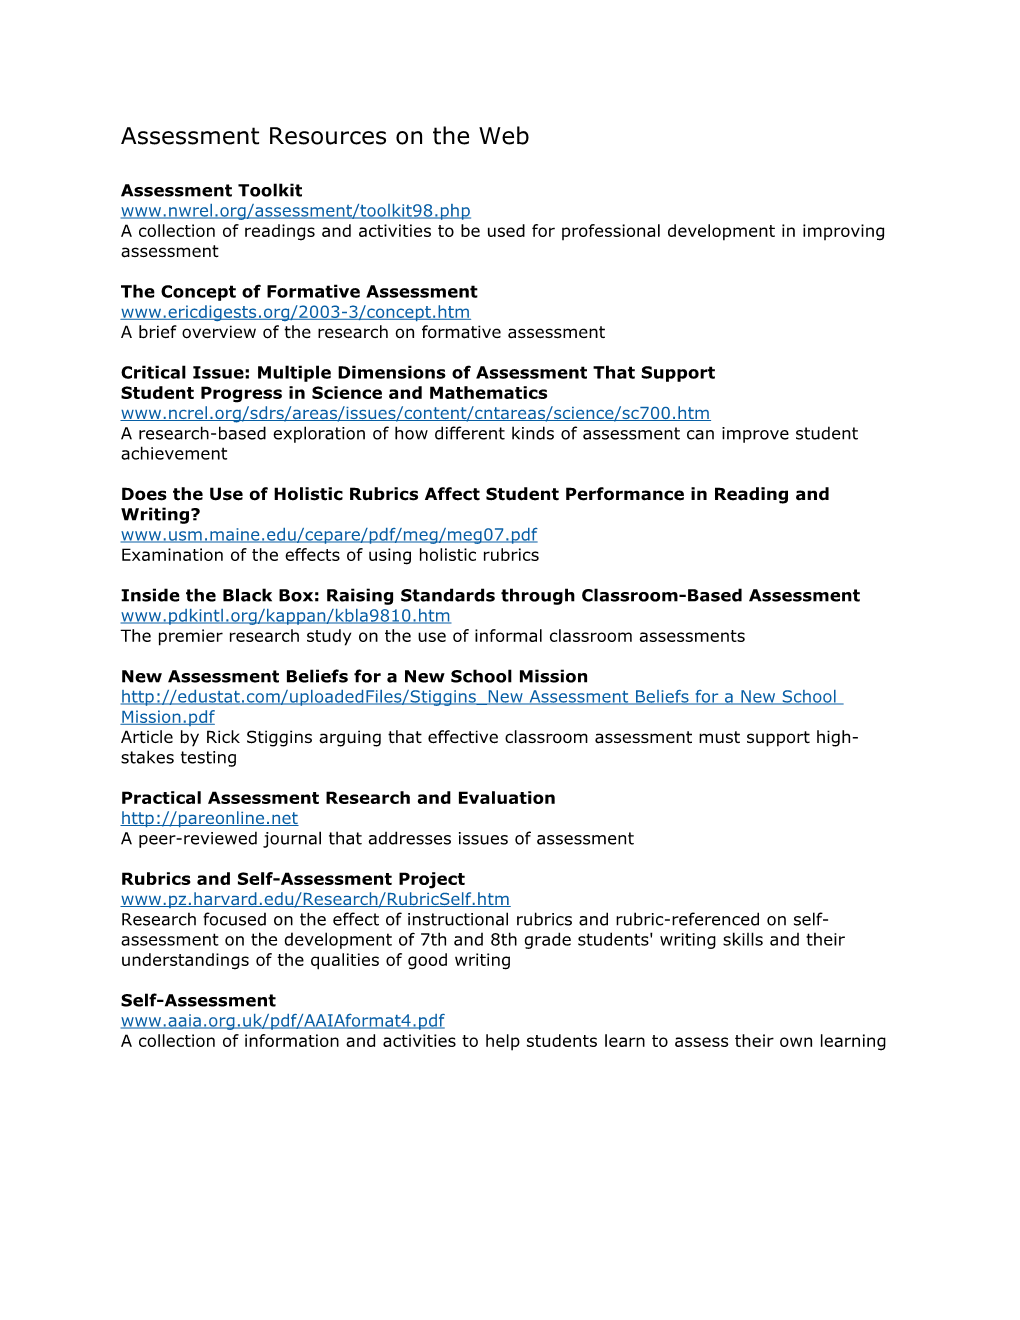 Assessment Resources on the Web